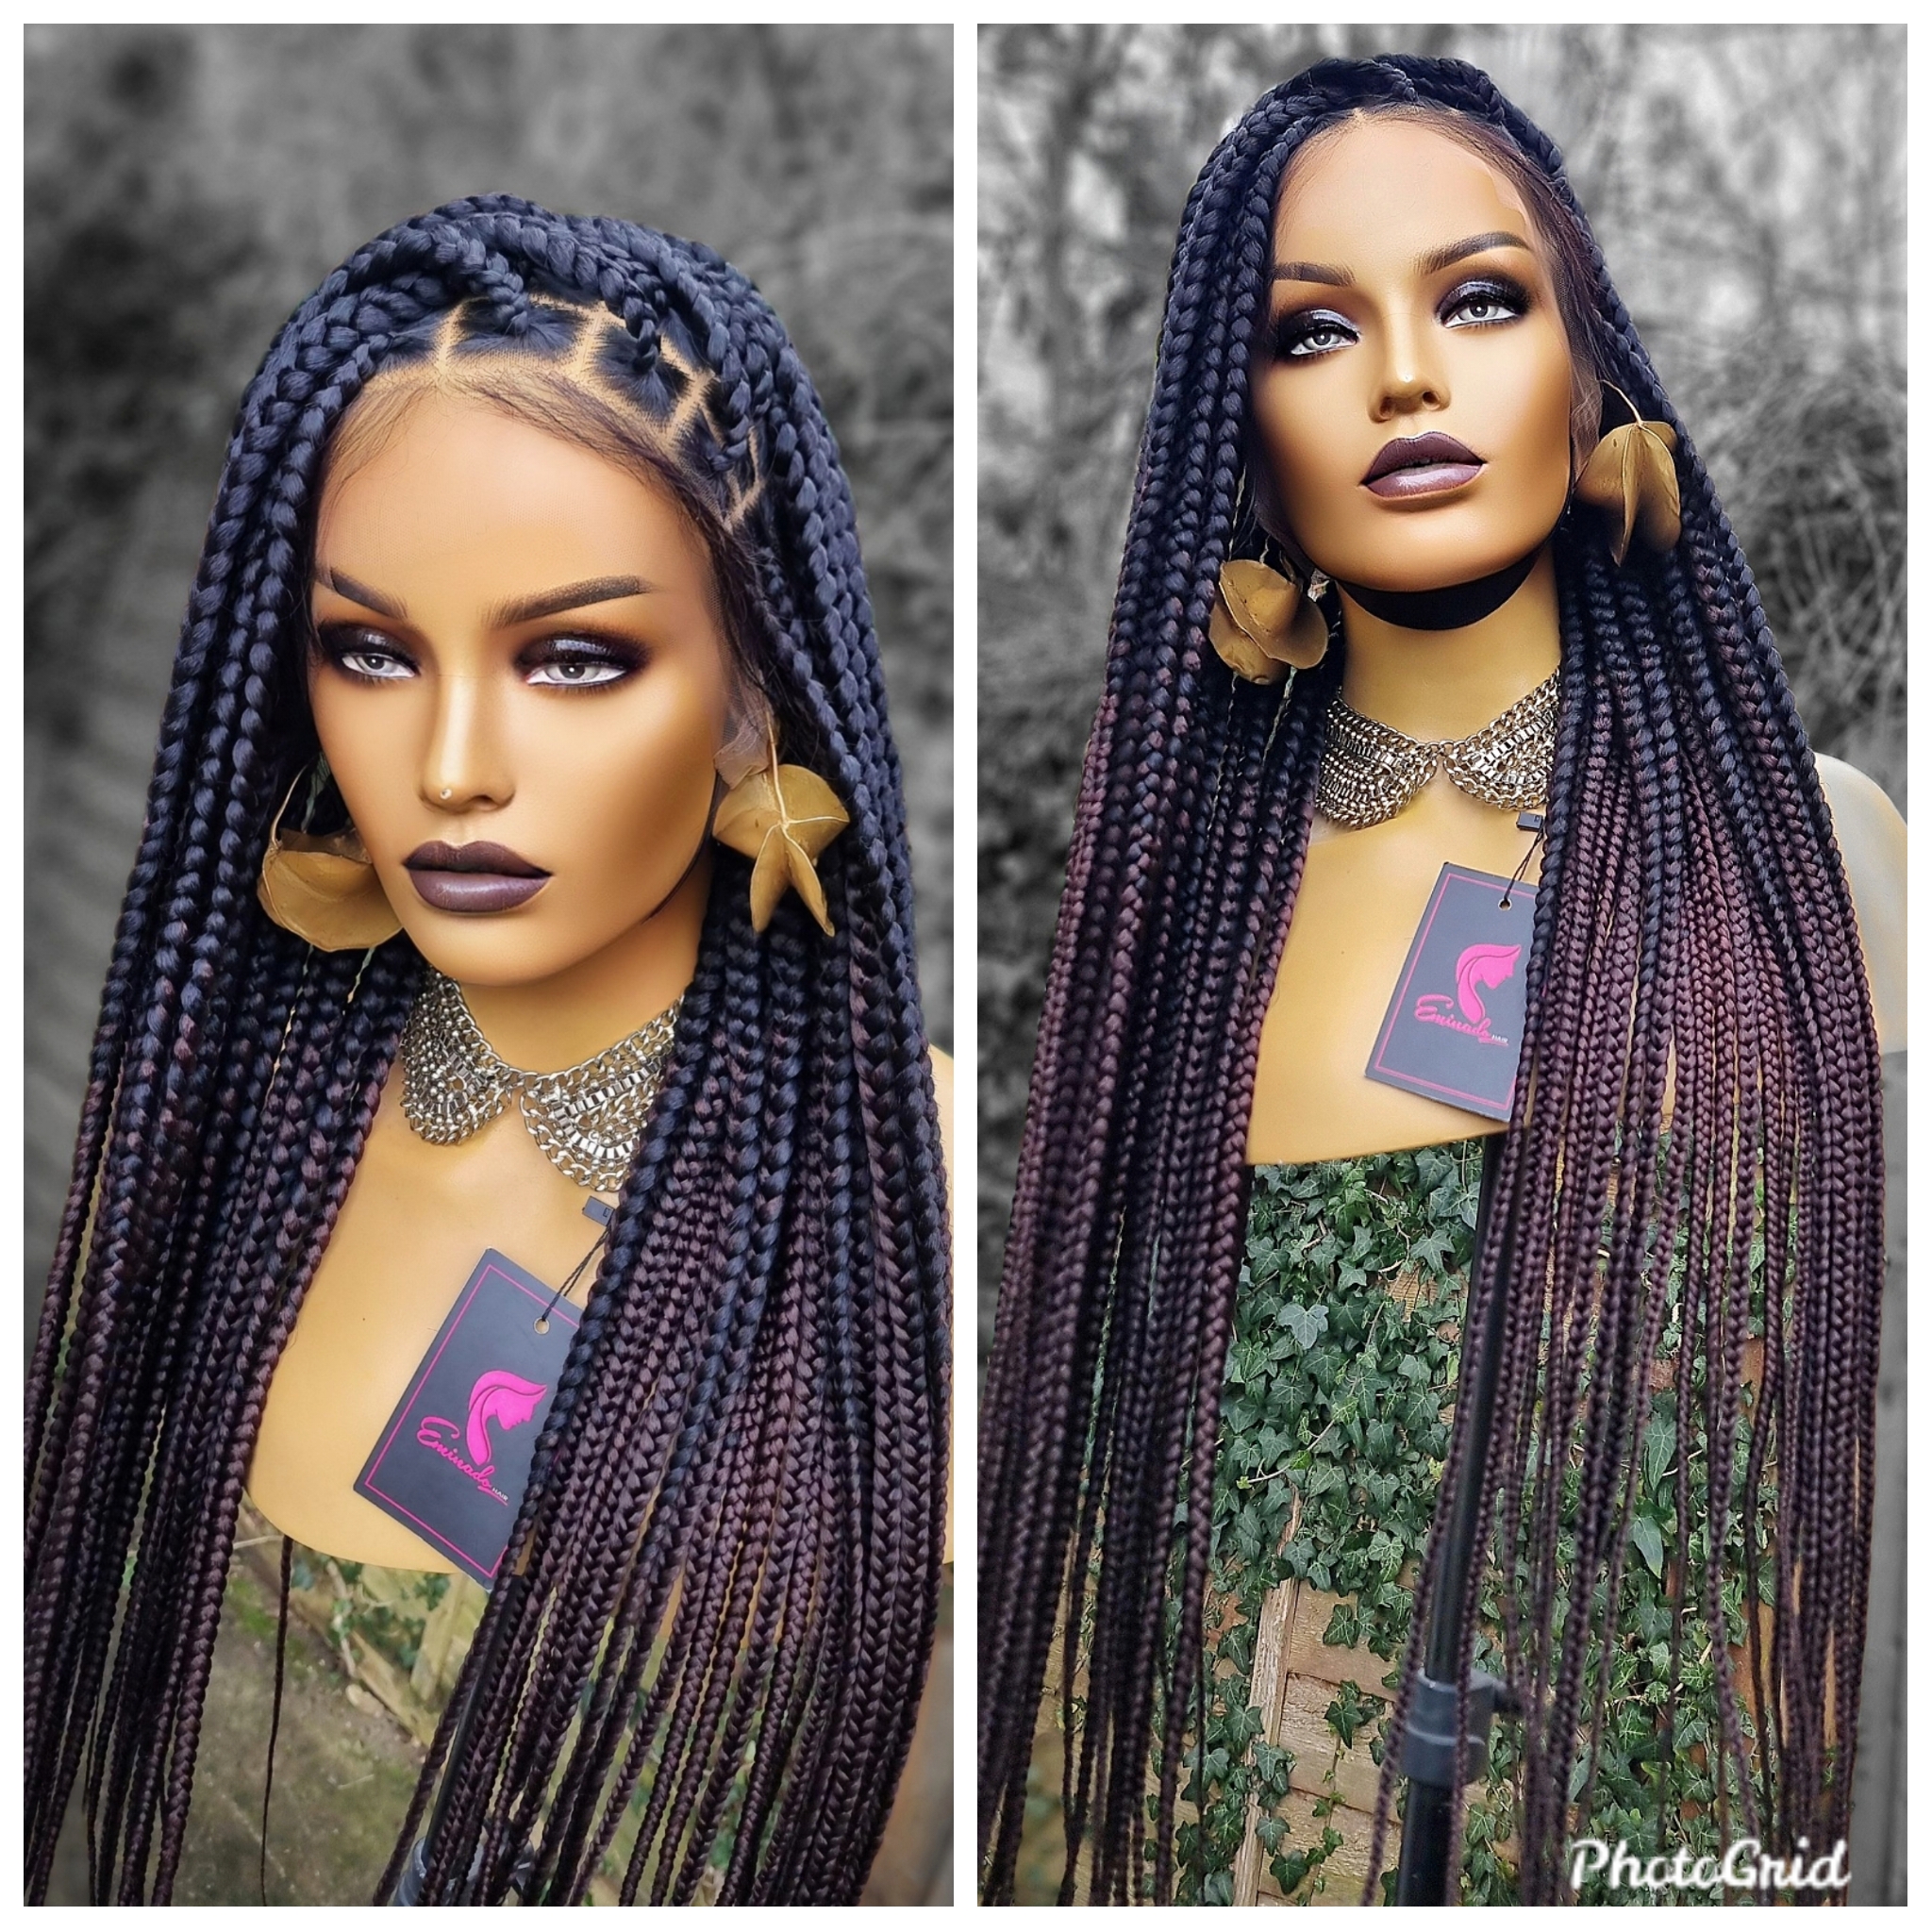 Ombre Knotless Braids Wigs for Women Braided Lace Front Wig Braided Lace  Wigs Braided Full Lace Wigs Braided Wigs for Black Women Dreadlocks 